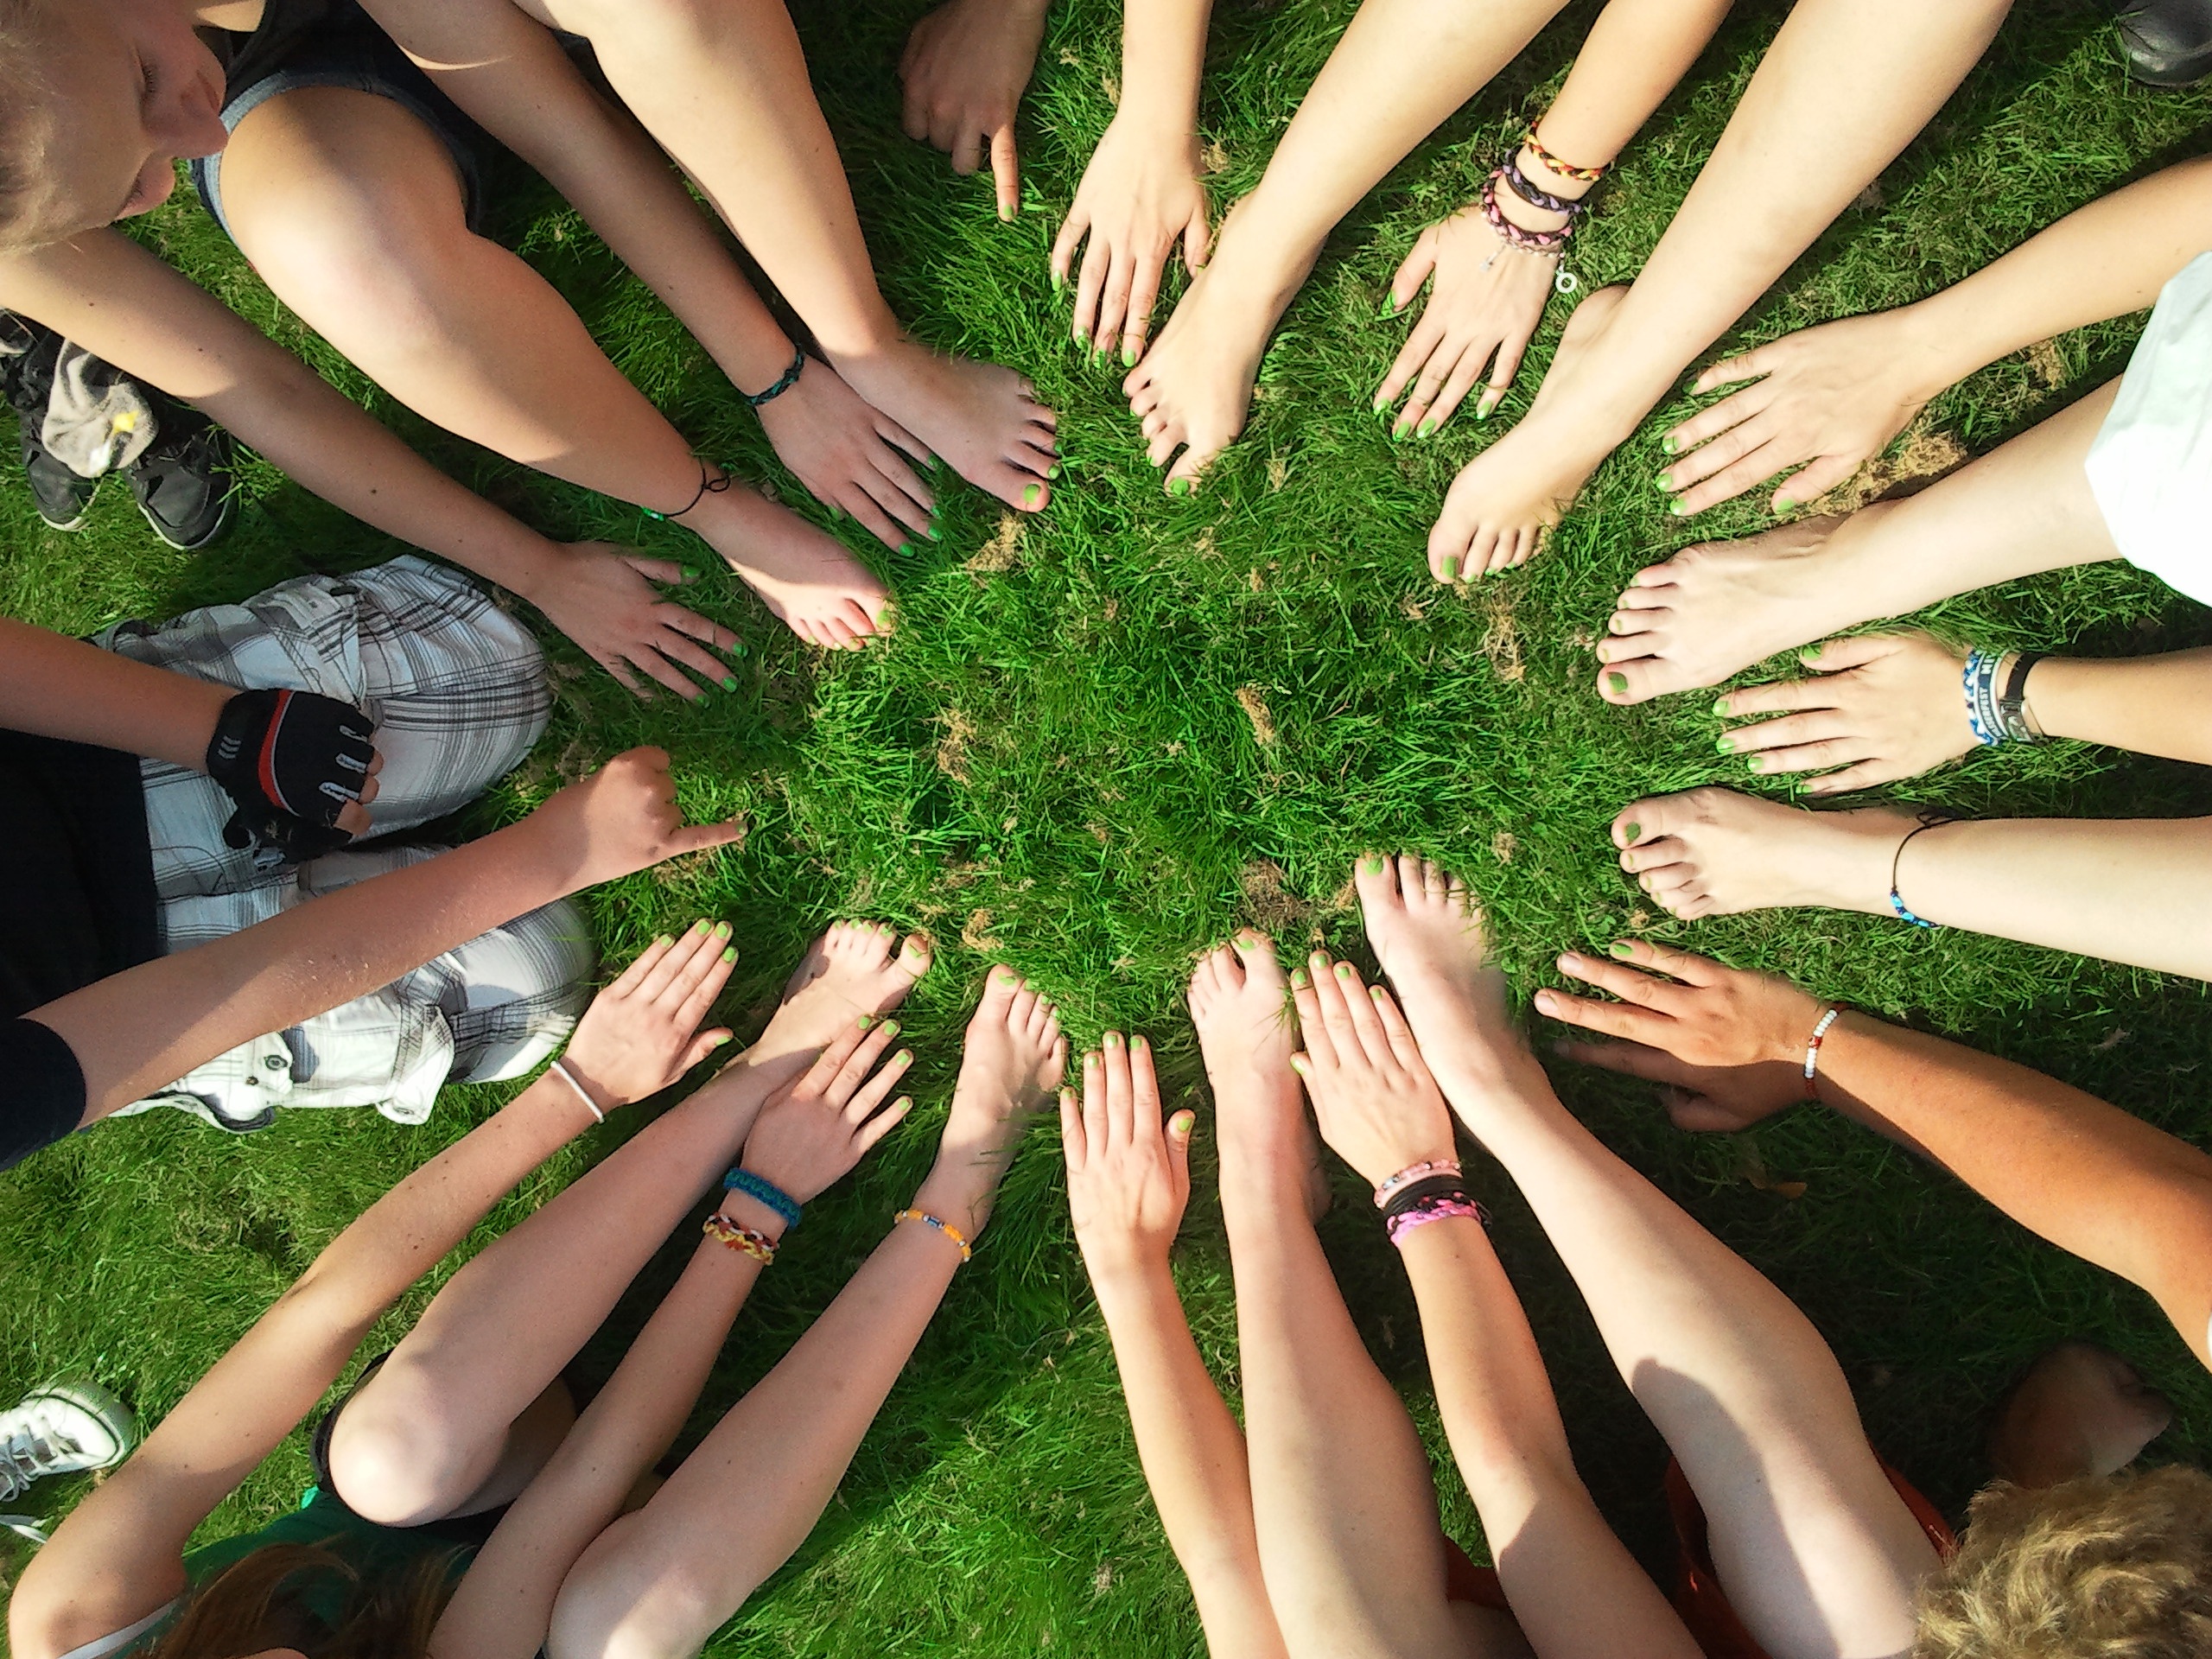 a circle of hands and feet from a group of friends, on luscious grass.